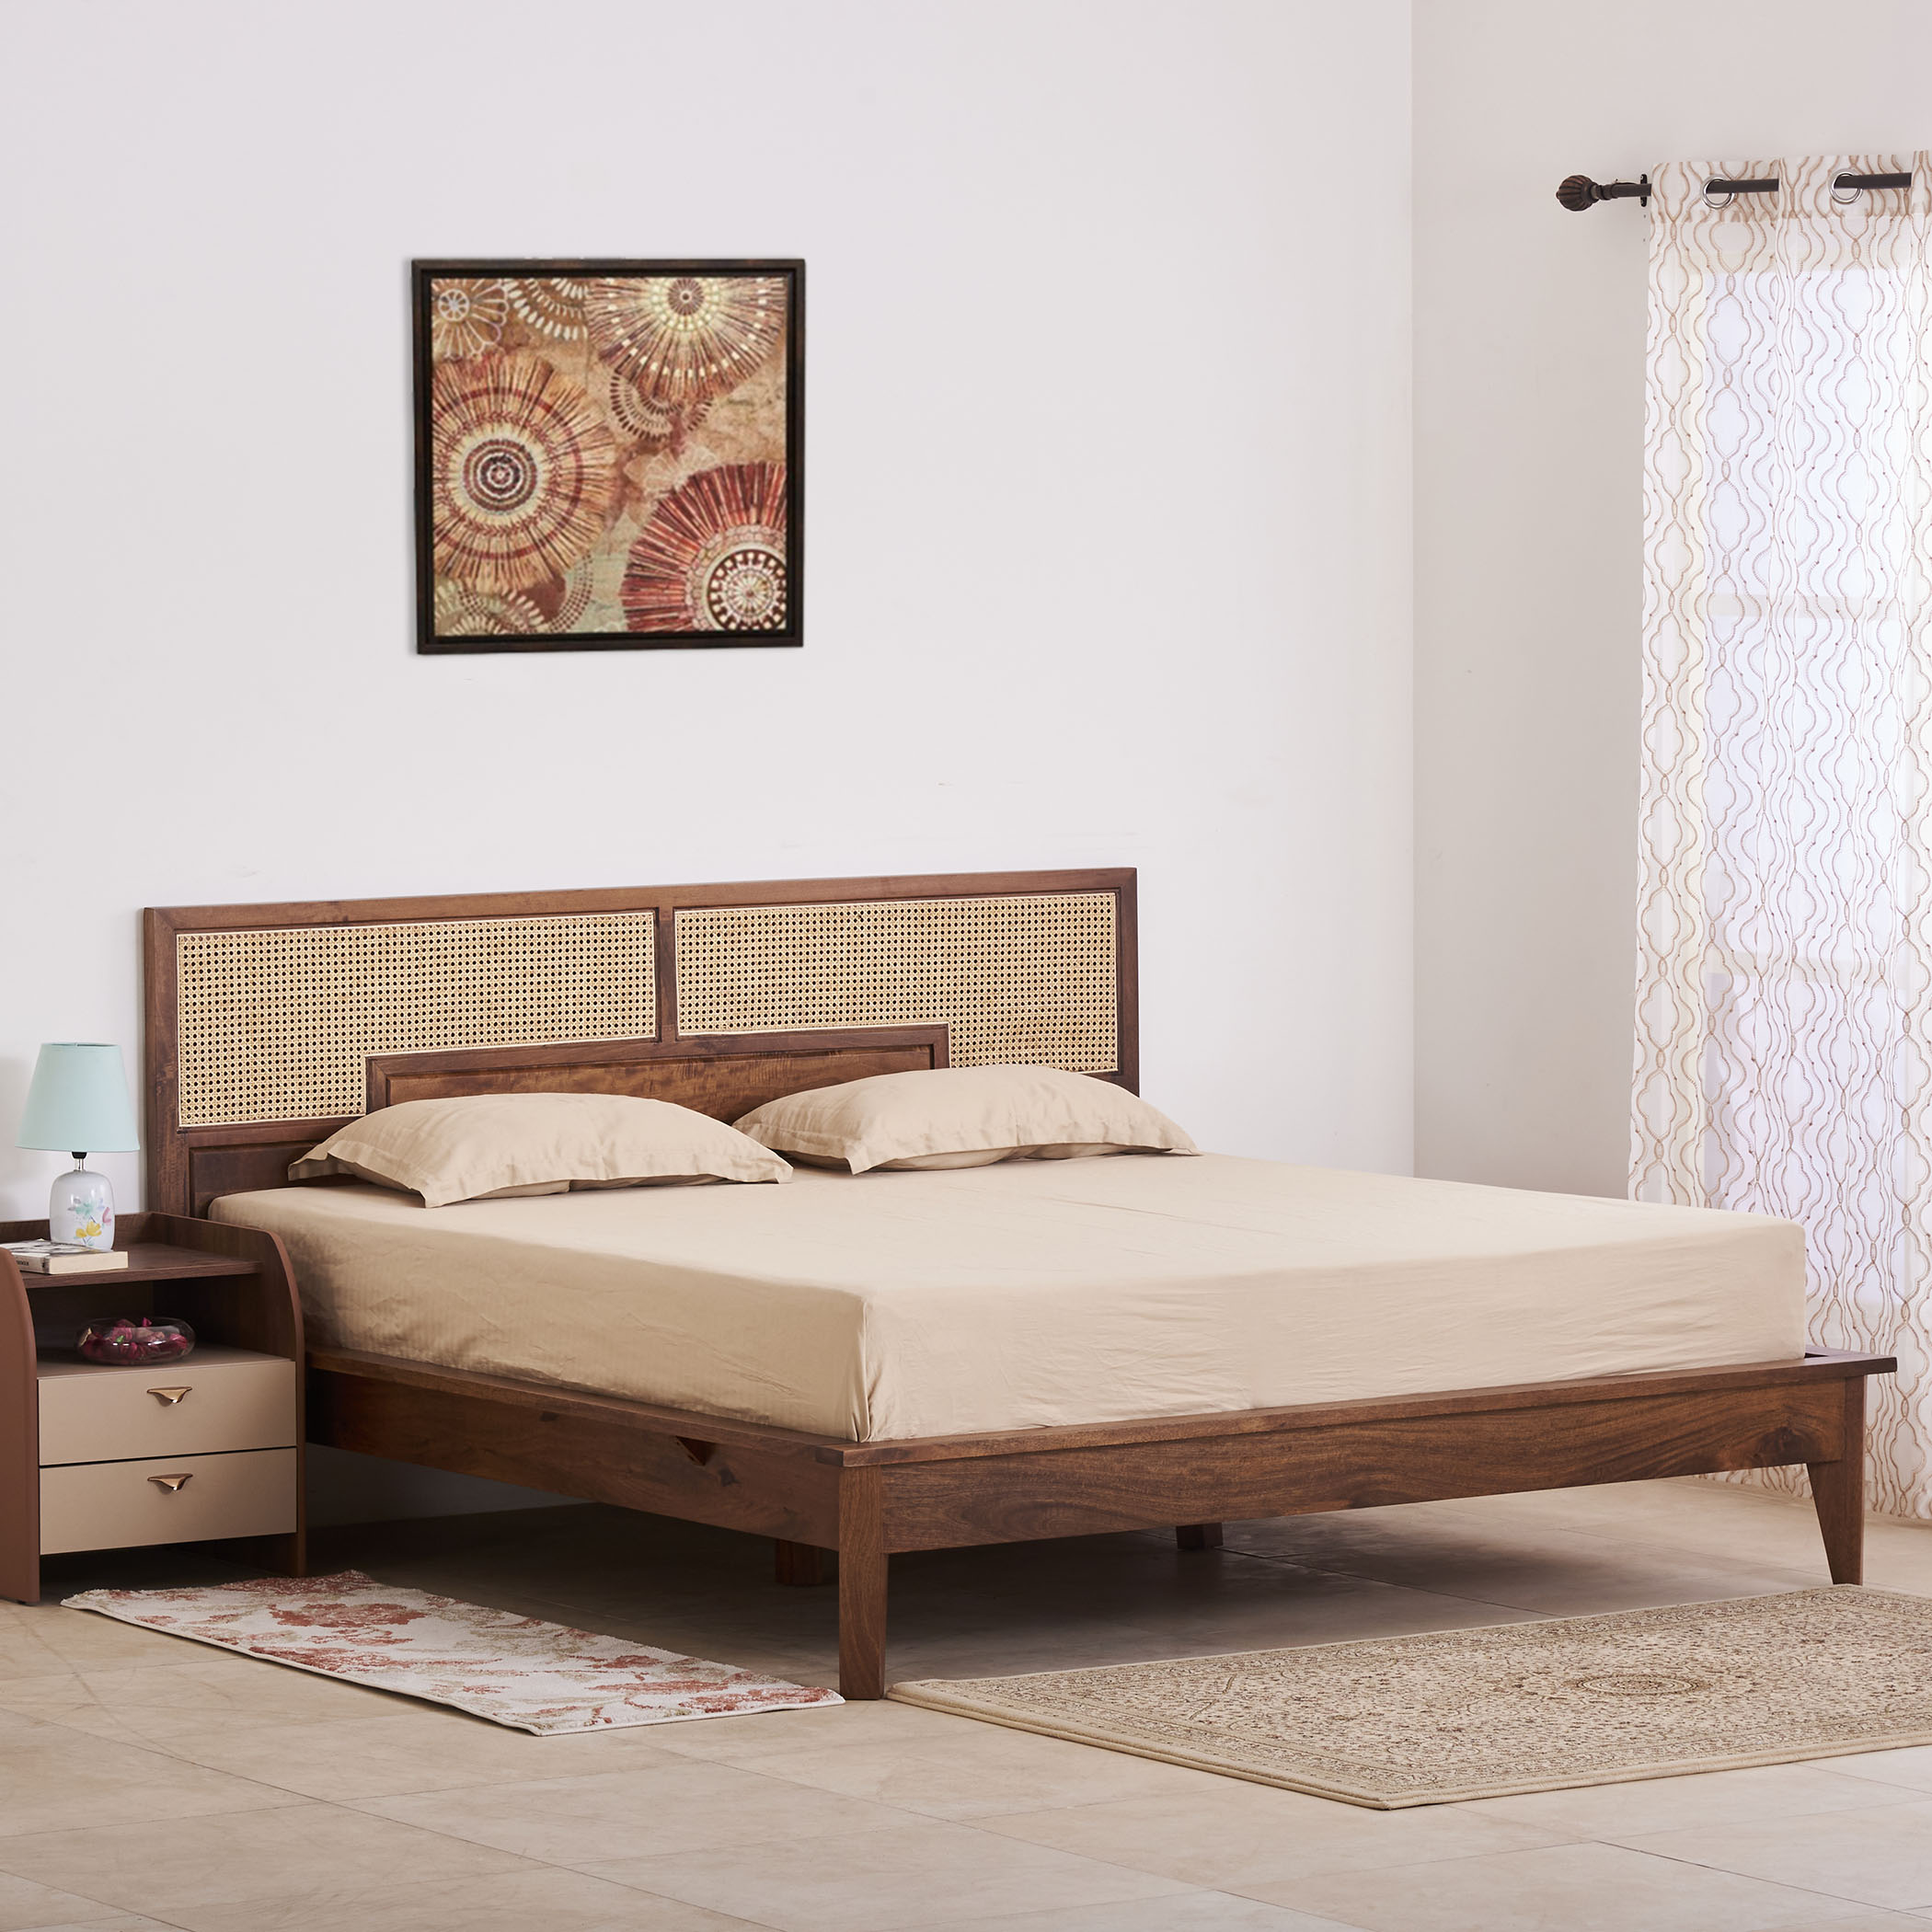 Cane Connection Acacia Wood Queen Bed - Brown